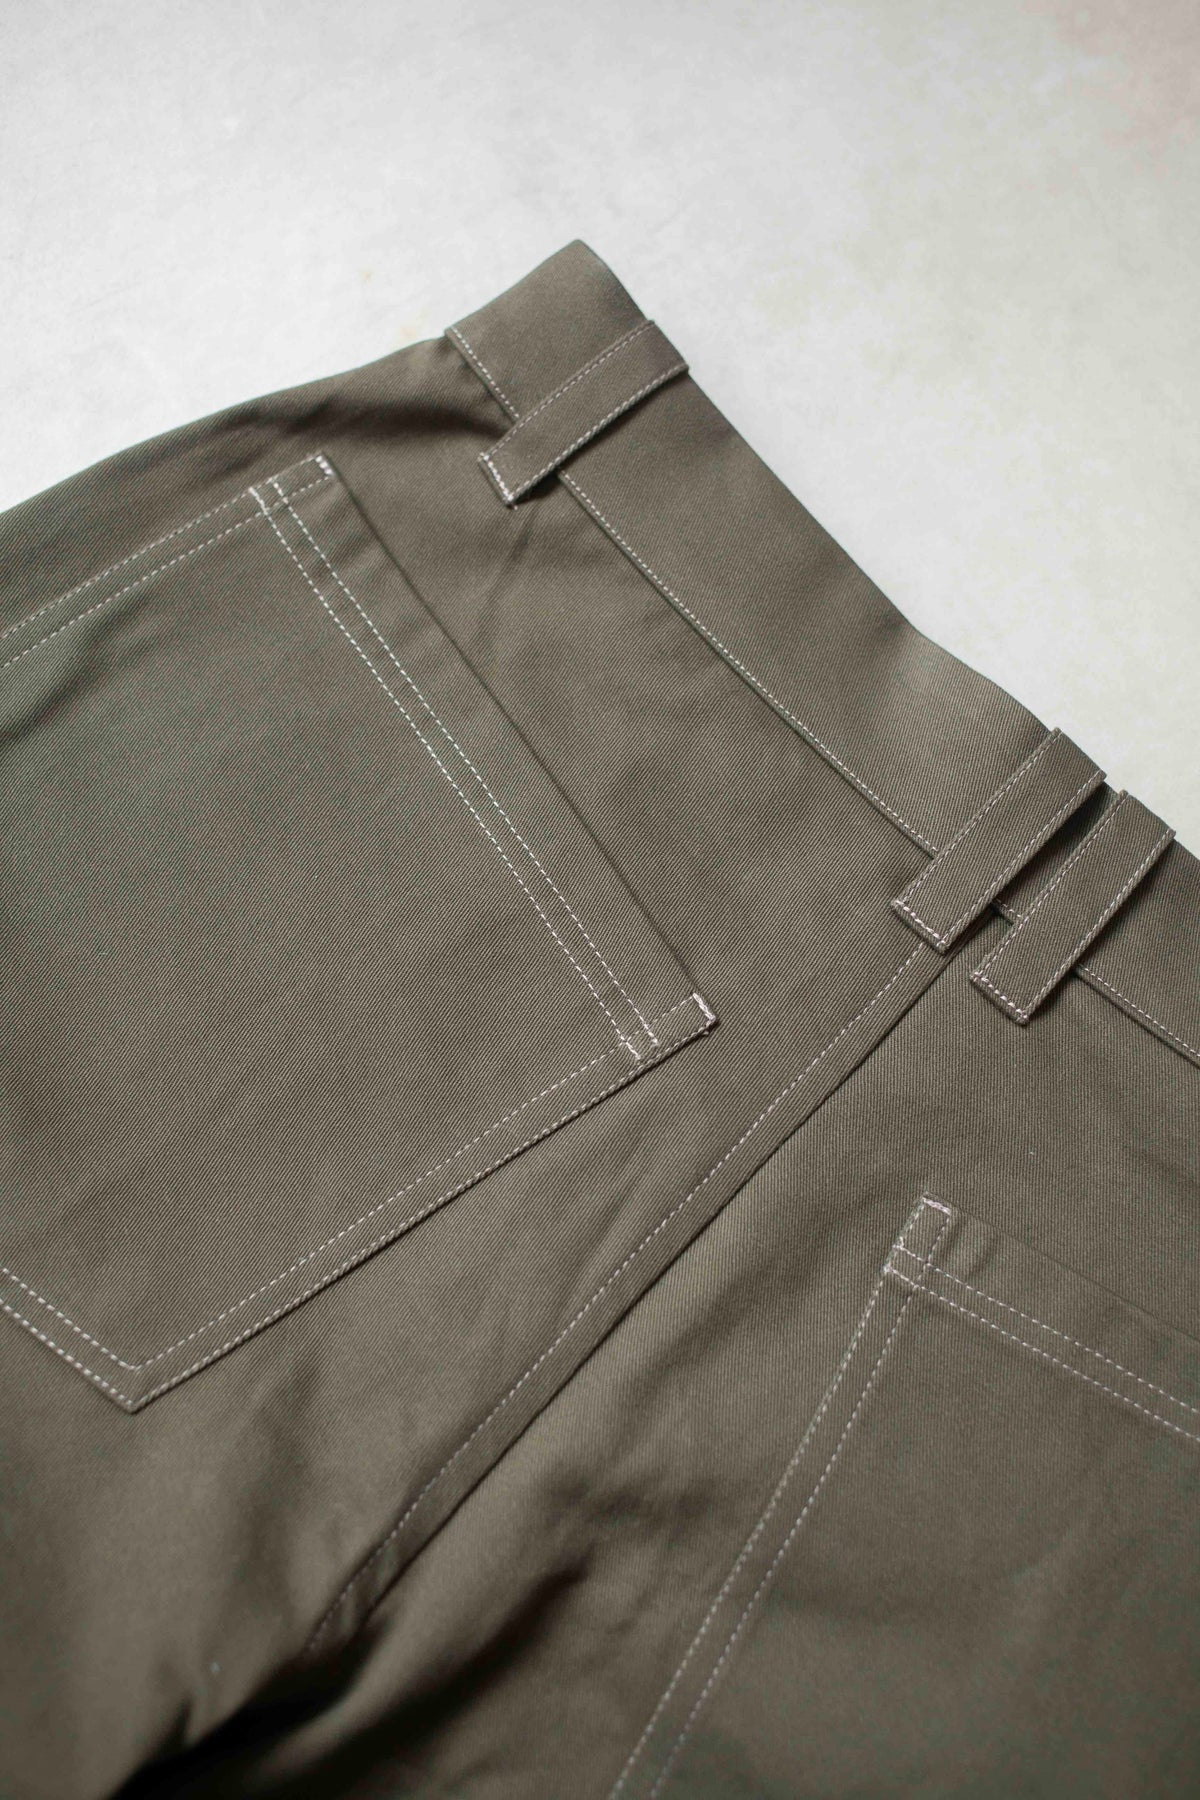 The Modern Sewing Co. Men's Worker Trousers - The Fold Line